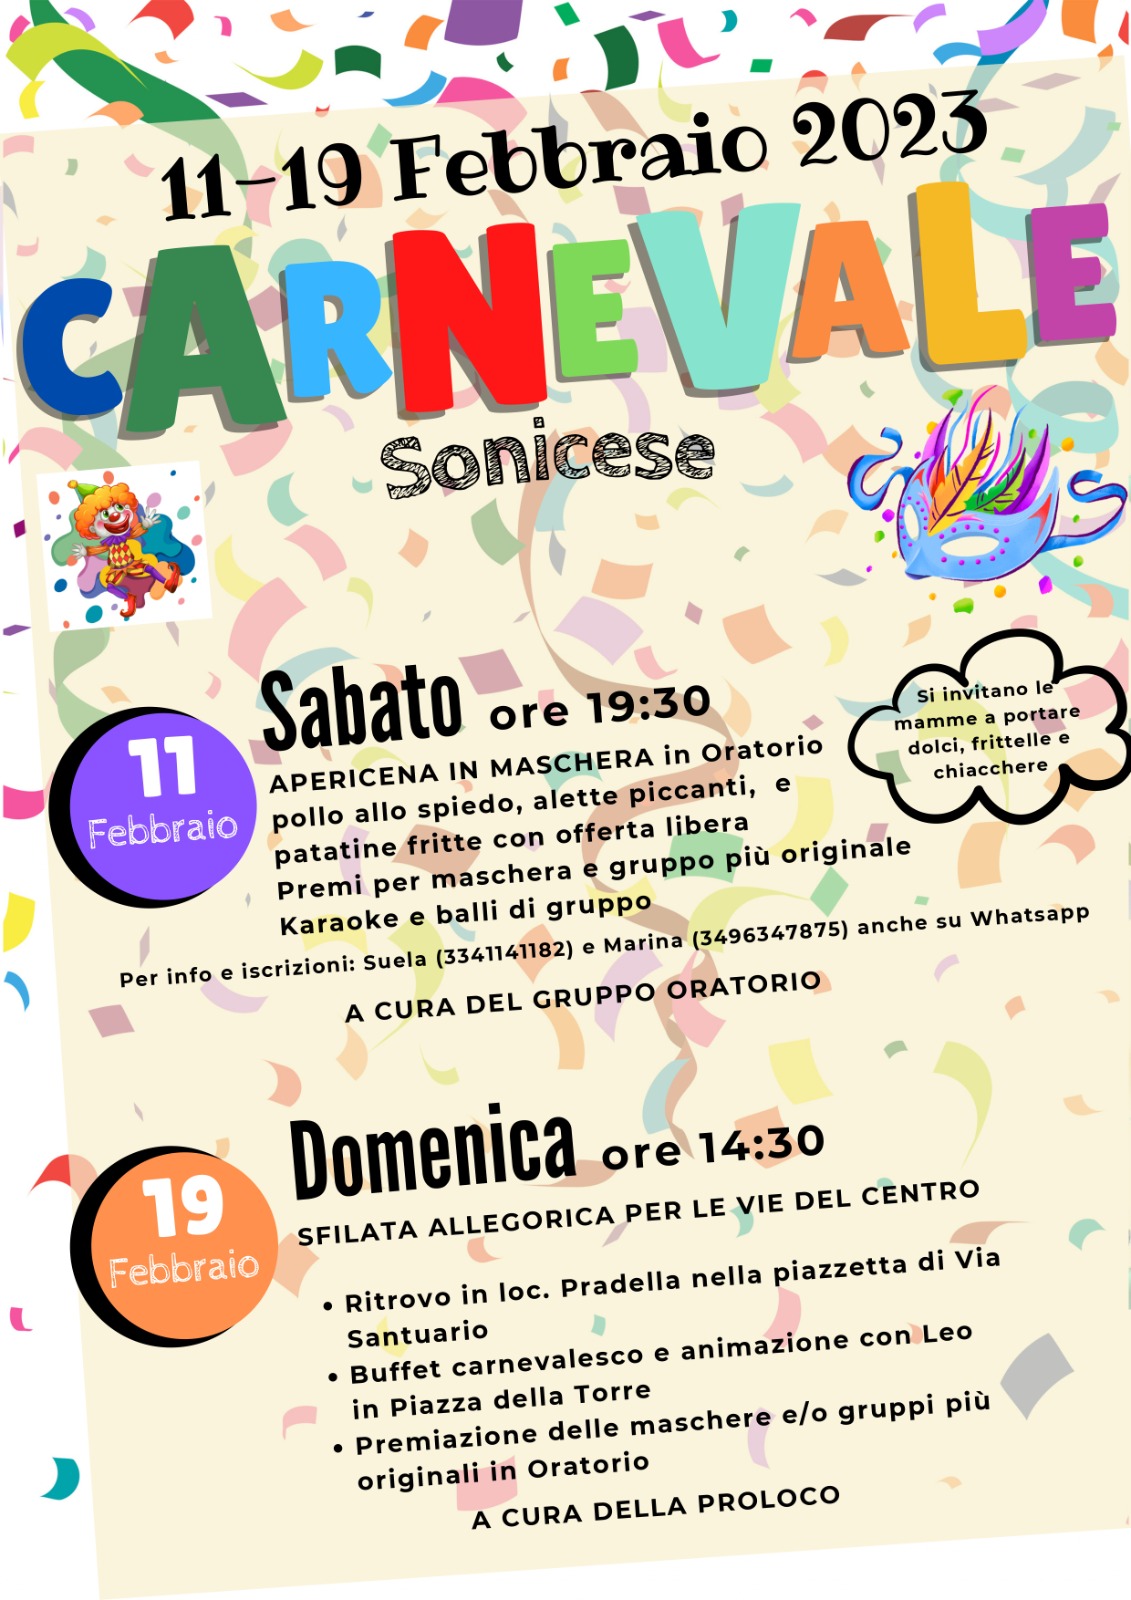 Carnevale Sonicese 2023